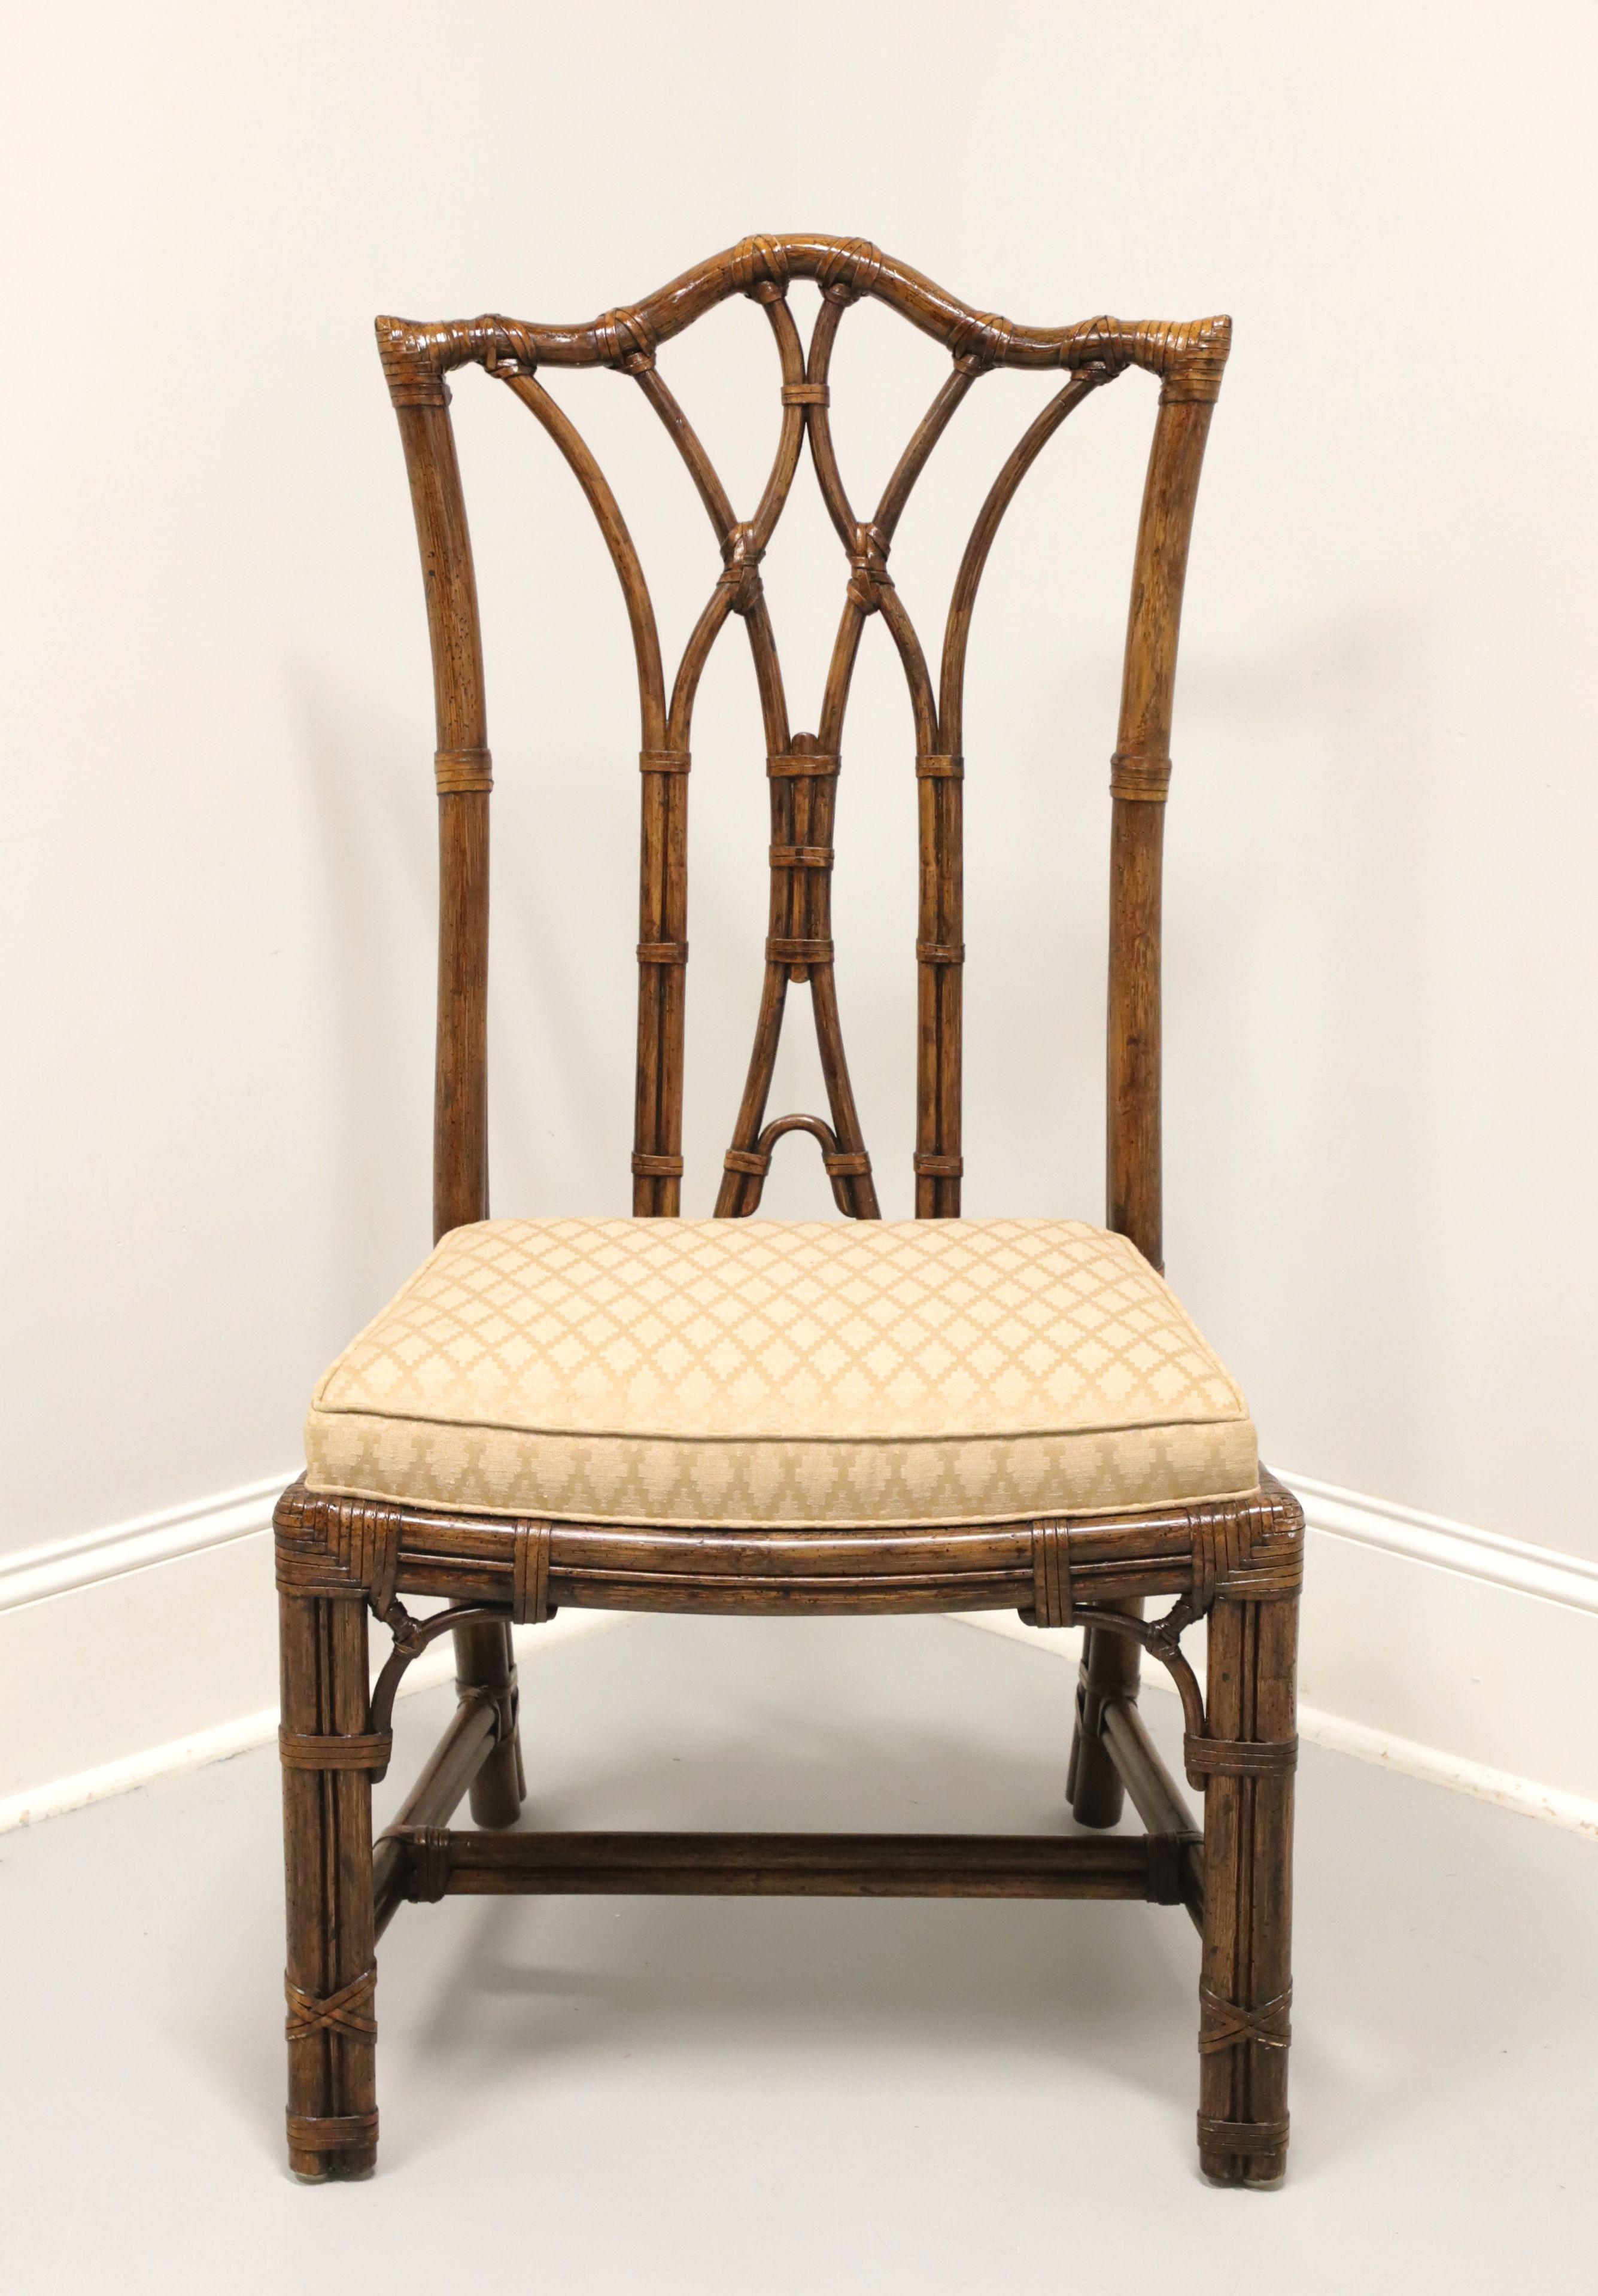 A Chinese Chippendale style side chair by Henredon. Faux bamboo frame with rattan strapping, high back, arched crestrail, decorative back rest, beige & gold color diamond pattern fabric upholstered seat, lattice accents to corners under apron,